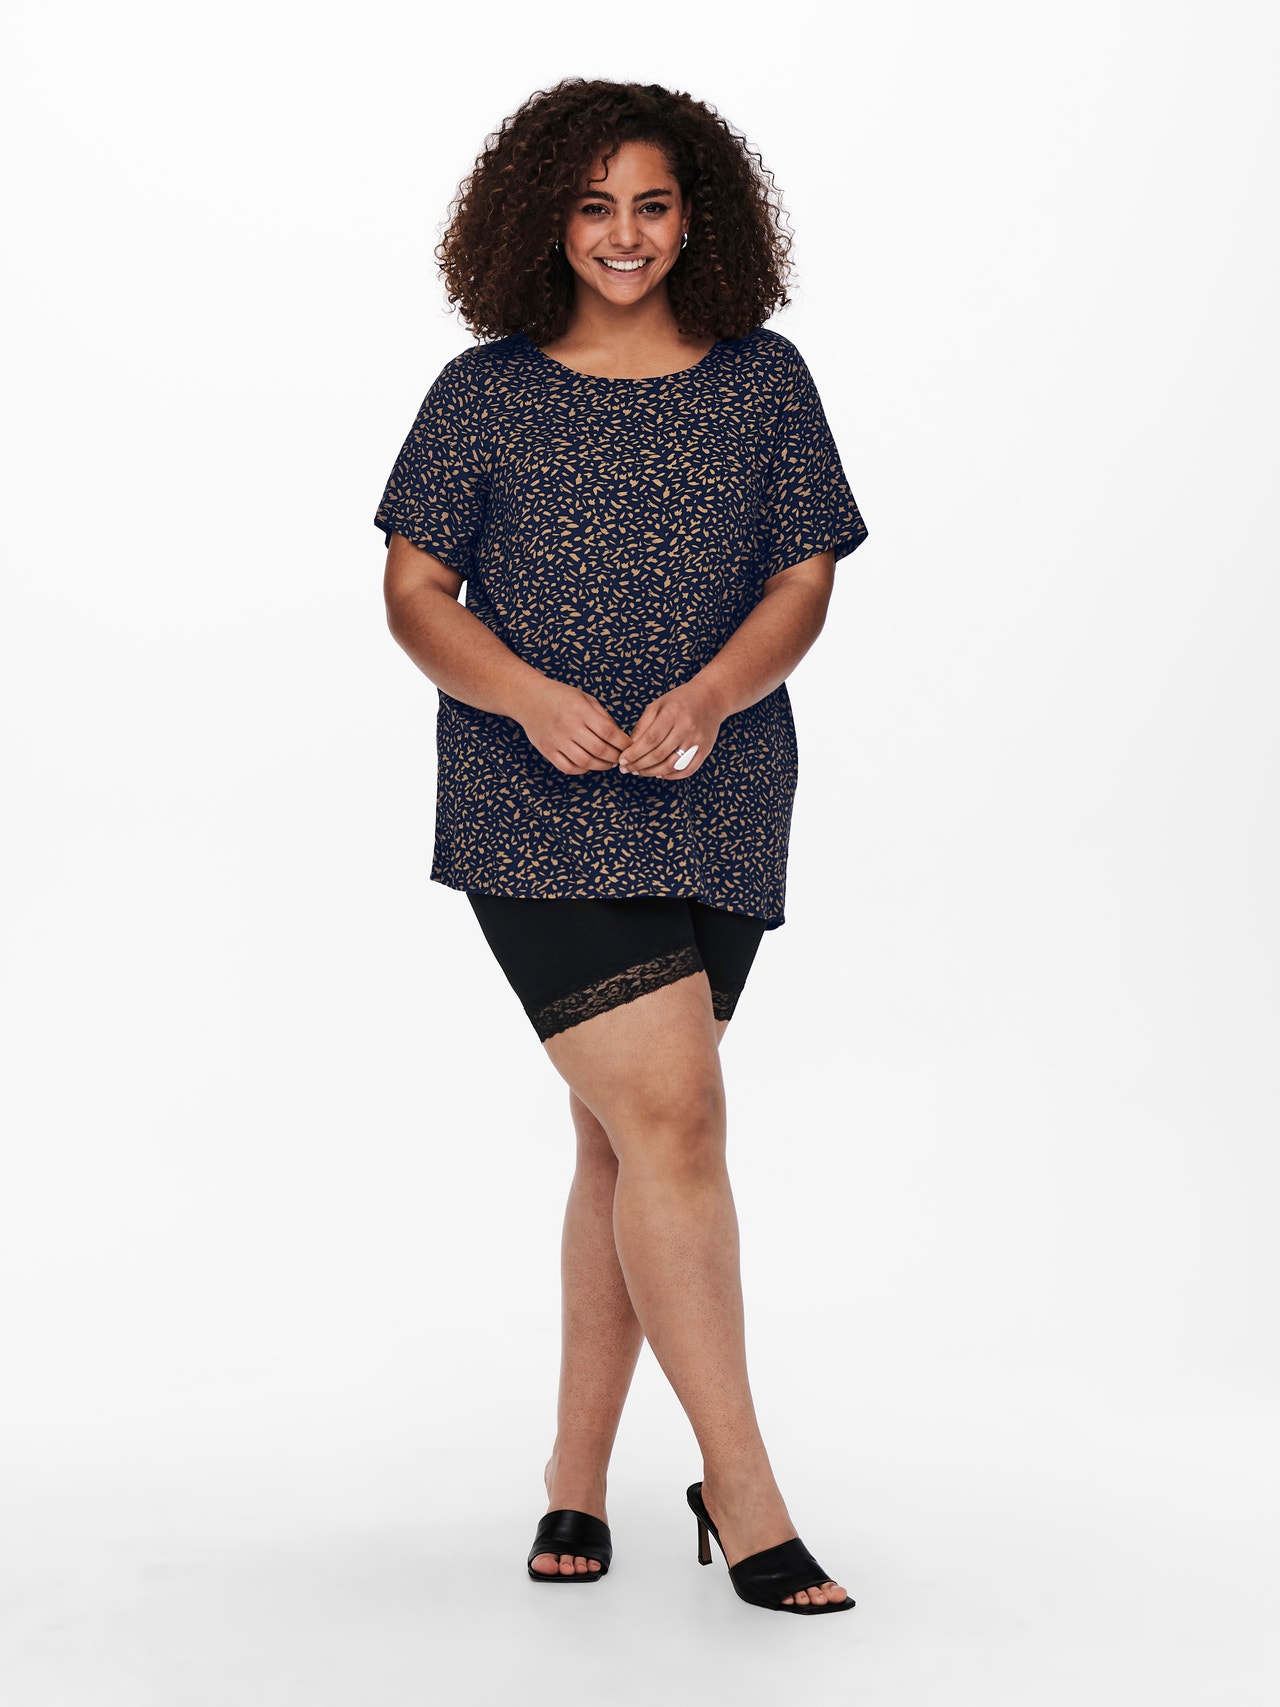 ONLY Curvy lace detail Shorts -Black - 15176215